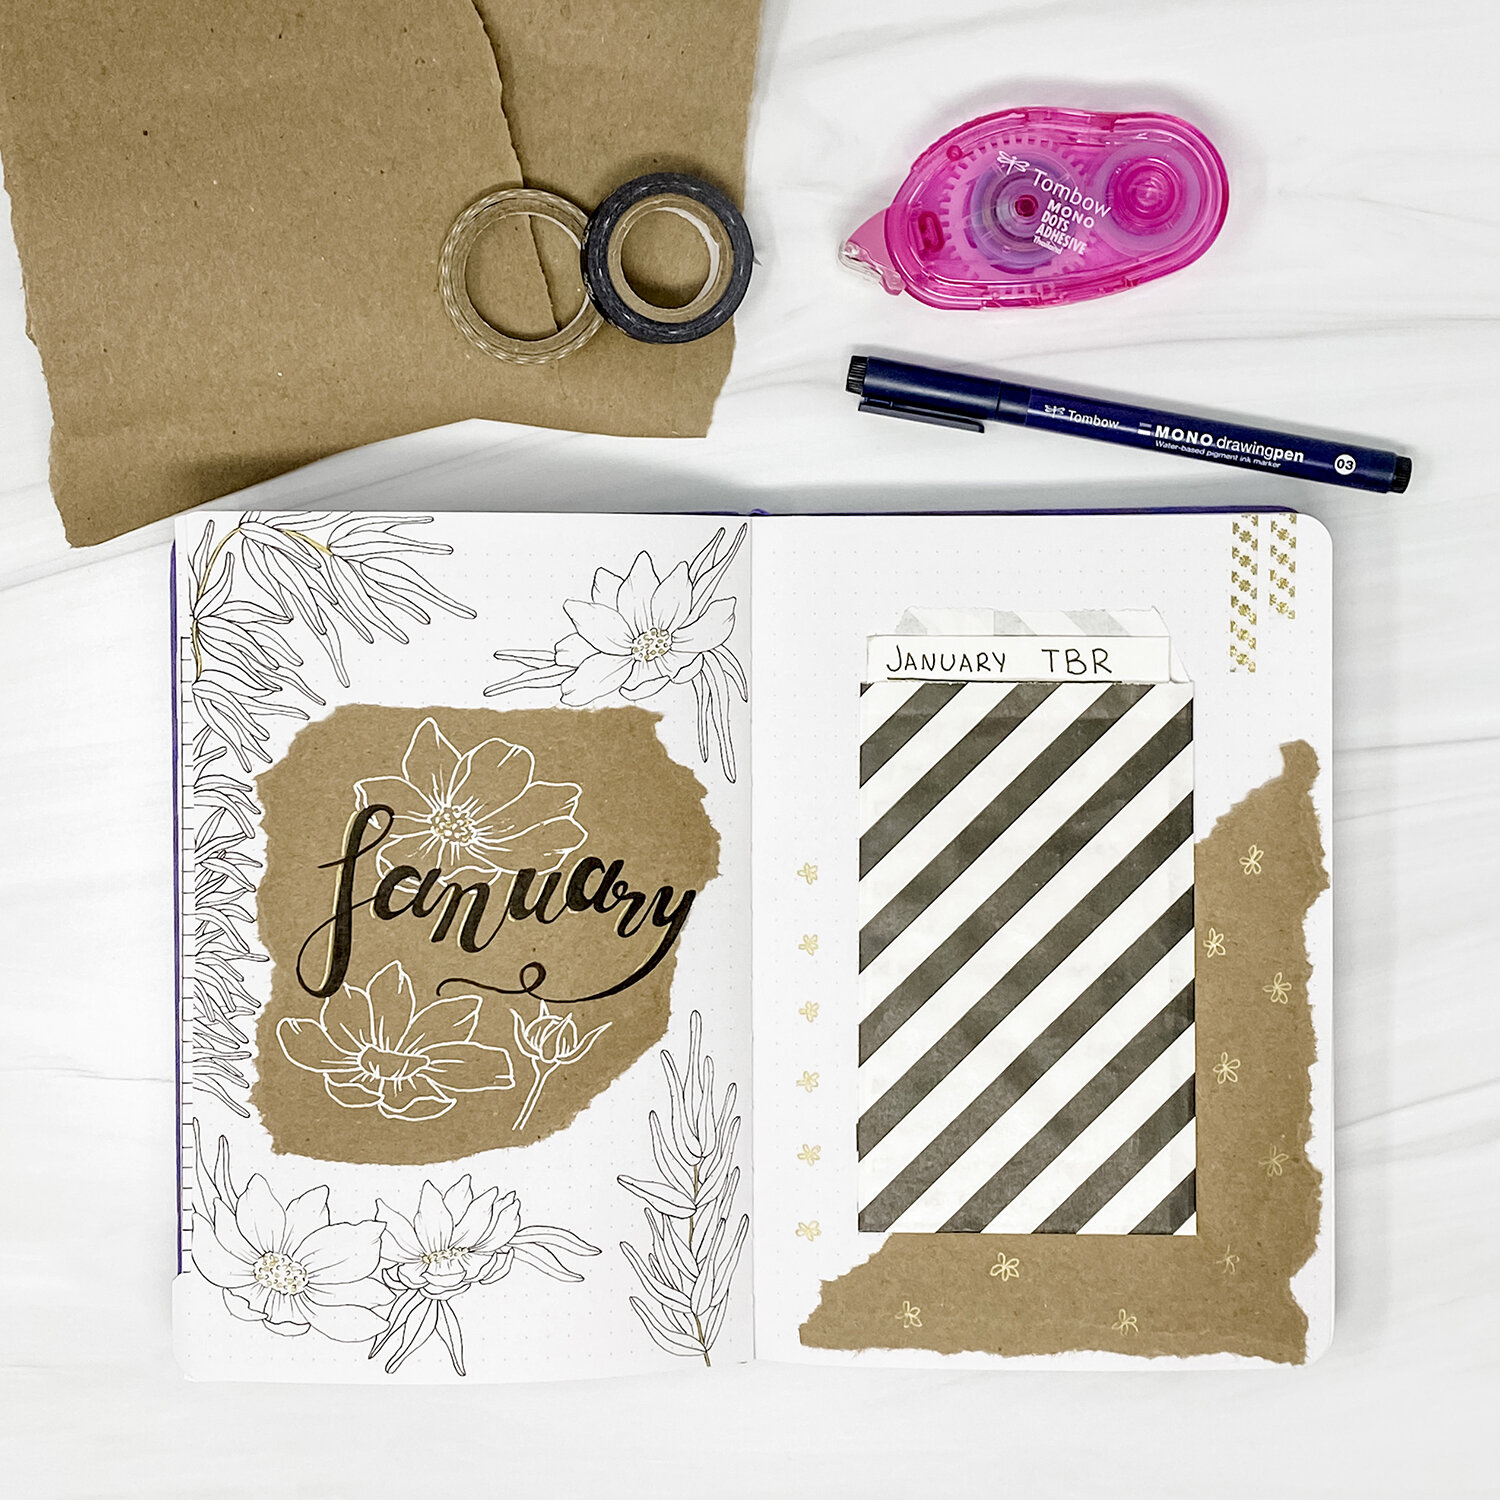 How to keep a reading journal - The Pen Company Blog